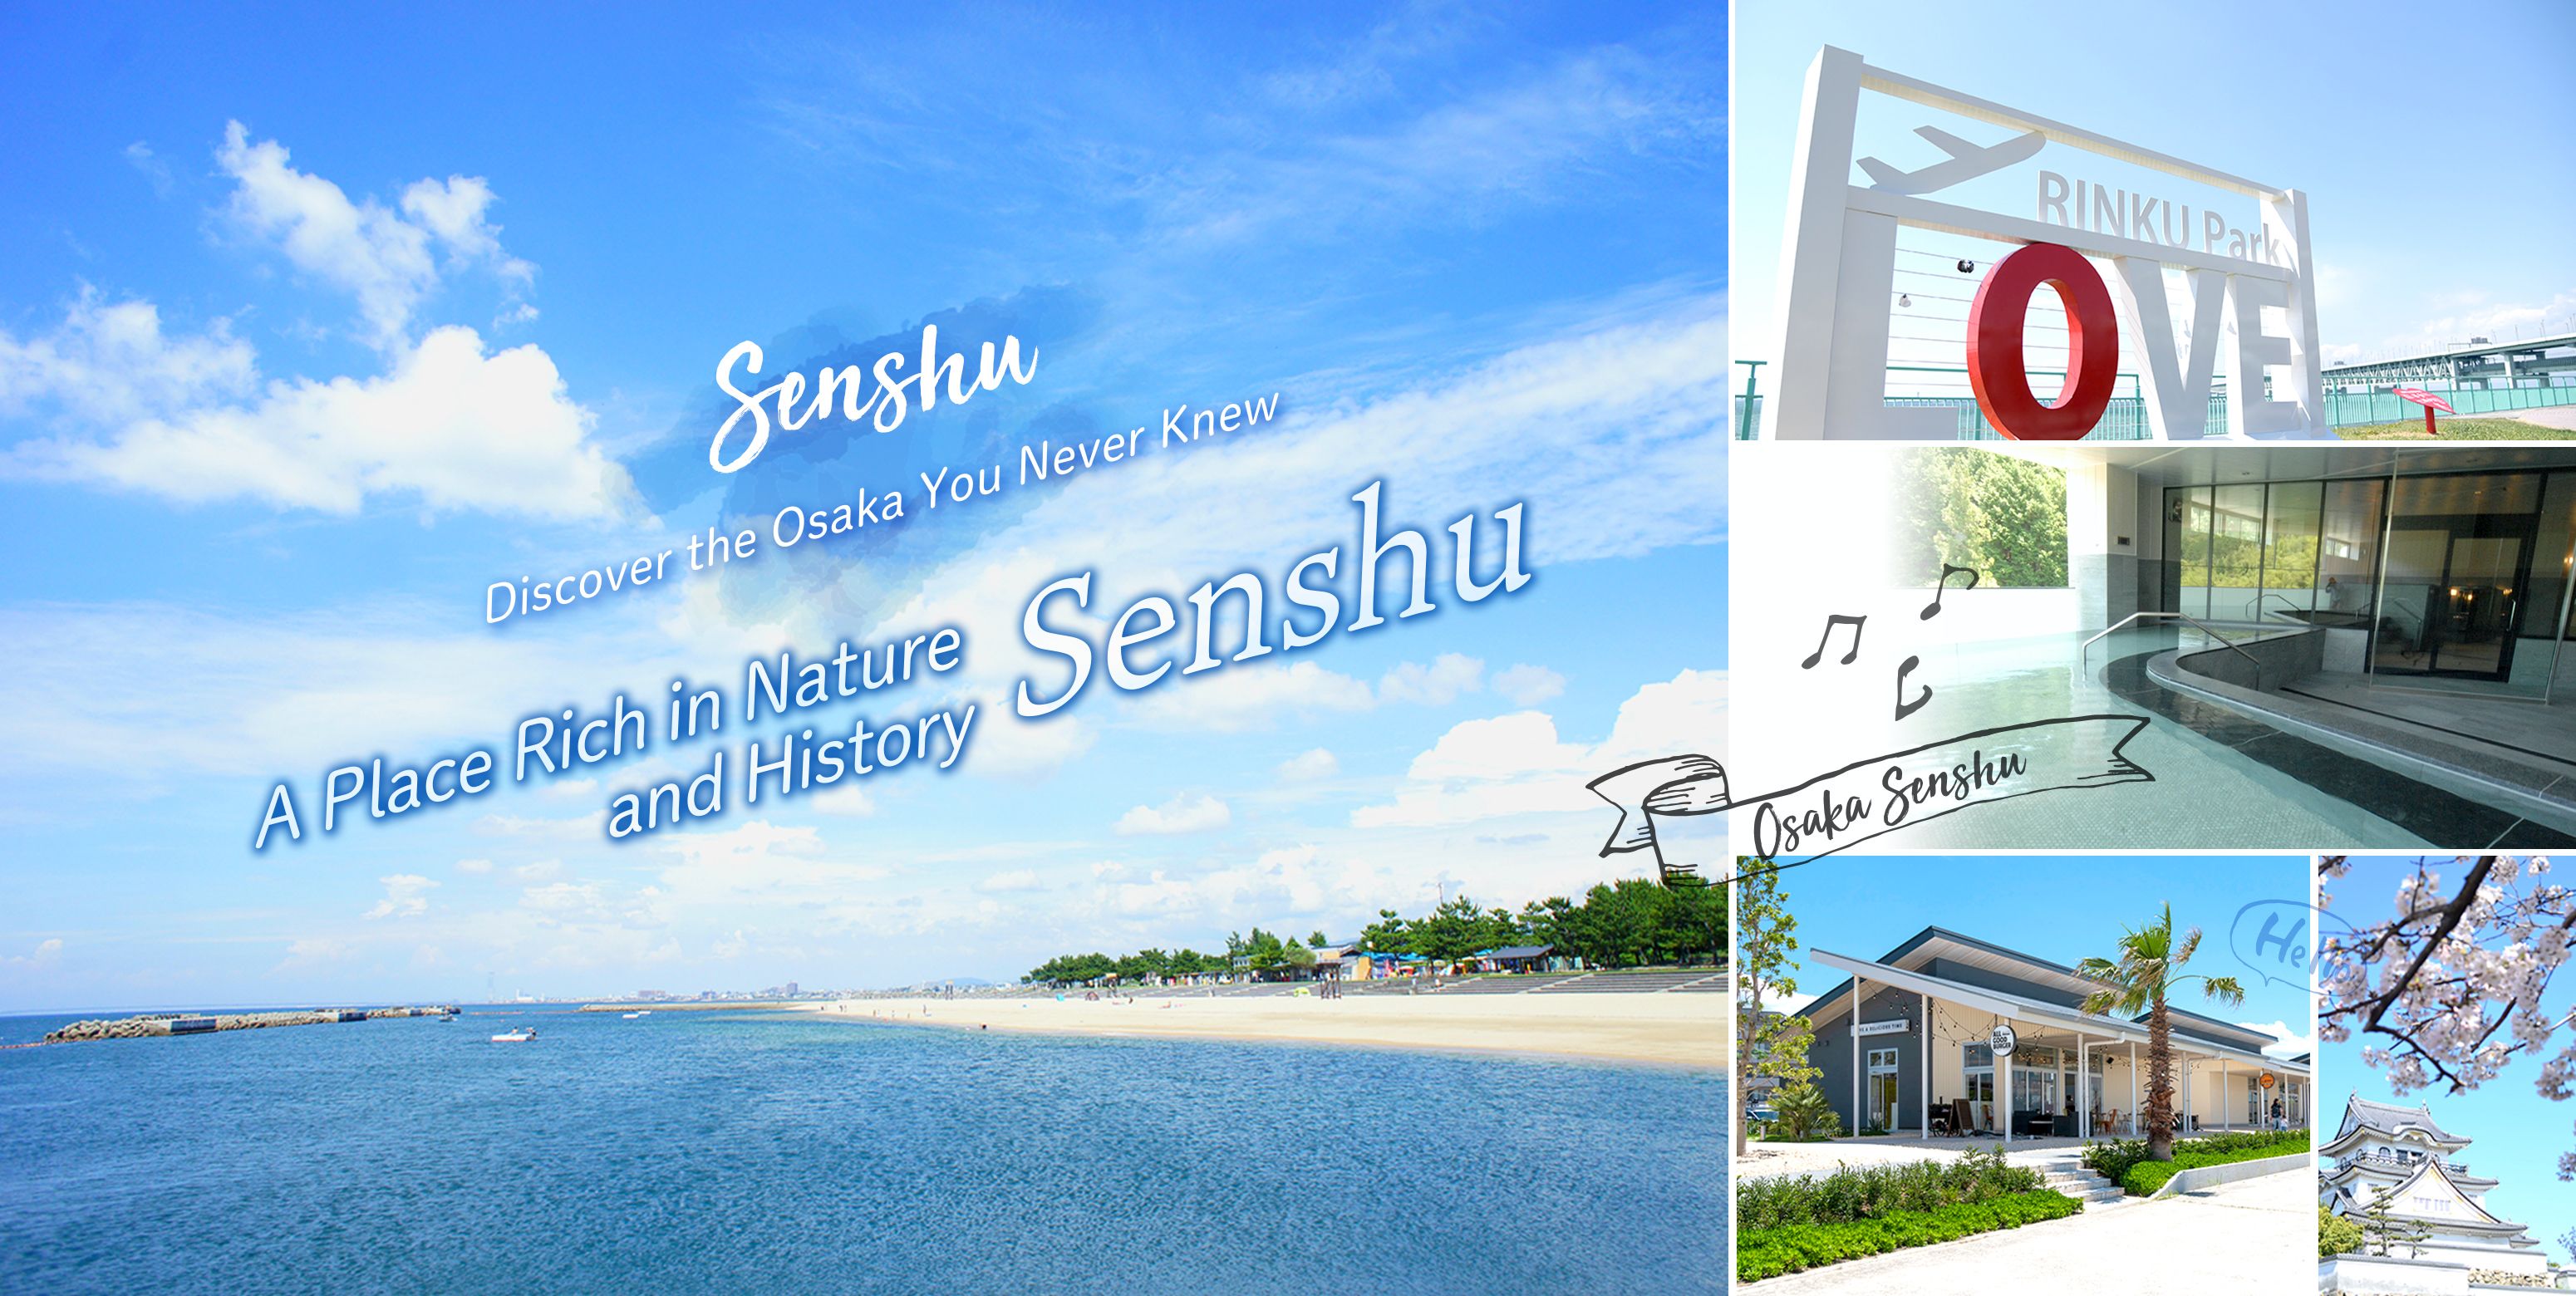 Discover the Osaka You Never Knew Senshu: A Place Rich in Nature and History